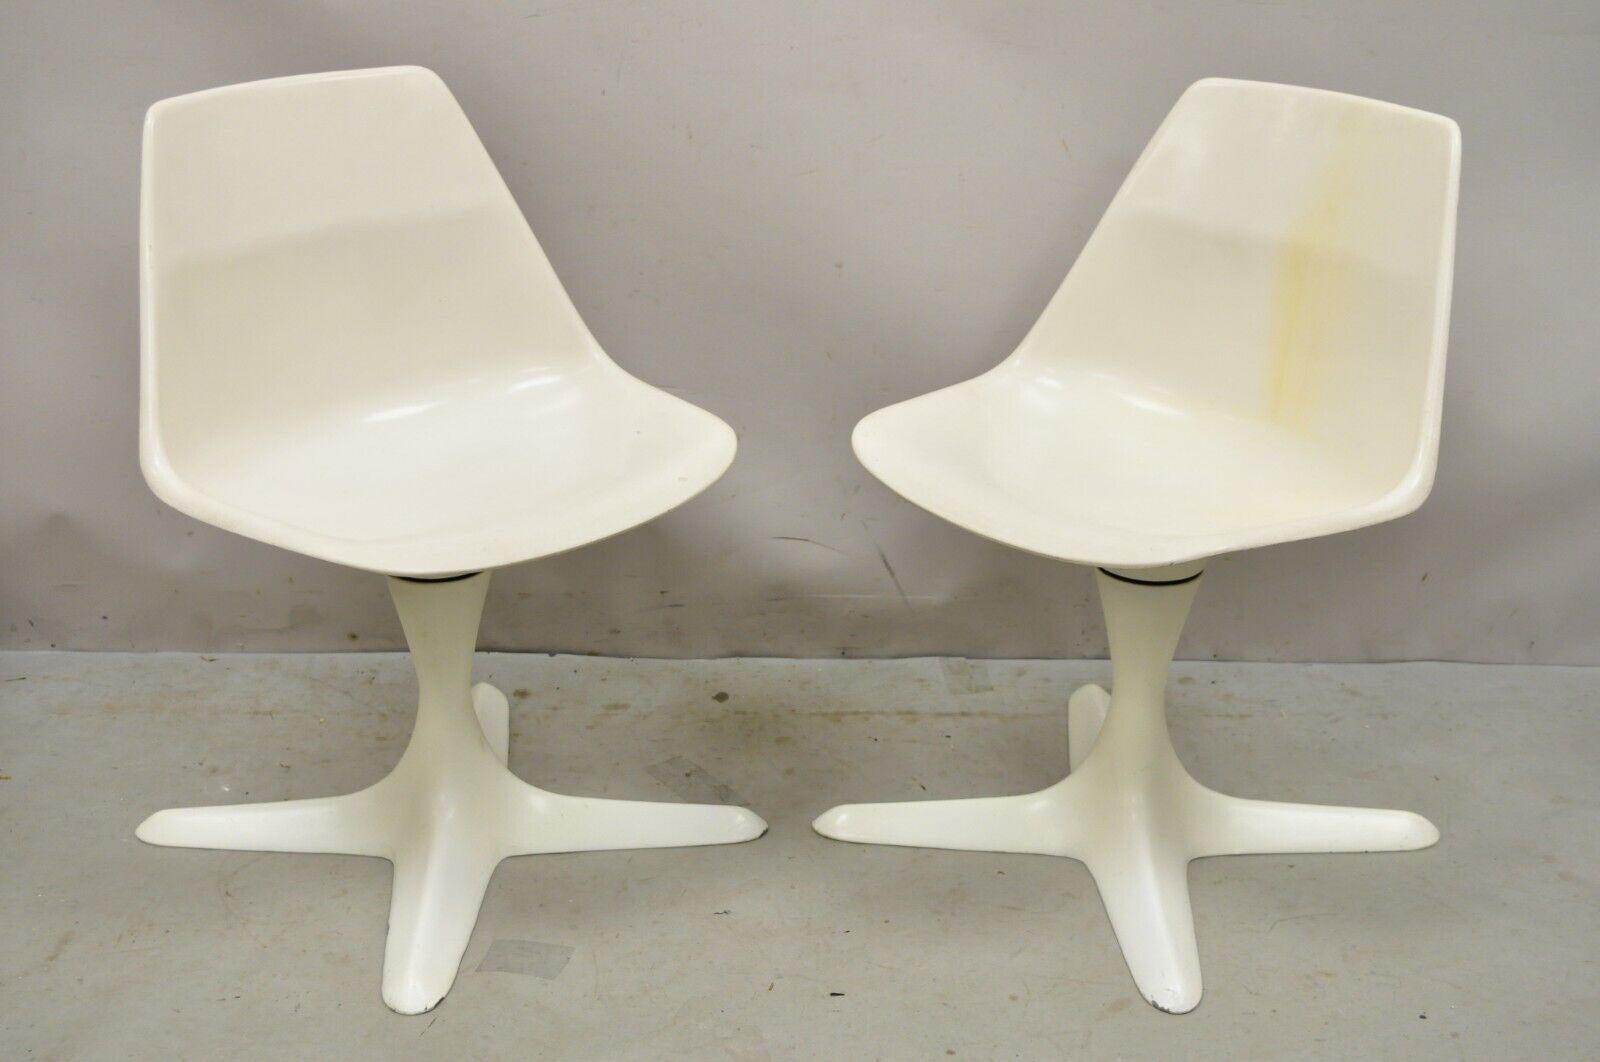 Mid Century Modern Burke Style Propeller Base Small White Swivel Chairs - a Pair. Item features is a unique small size, swivel & return seat, propeller pedestal base, very nice vintage pair, great style and form. Circa Mid 20th Century.